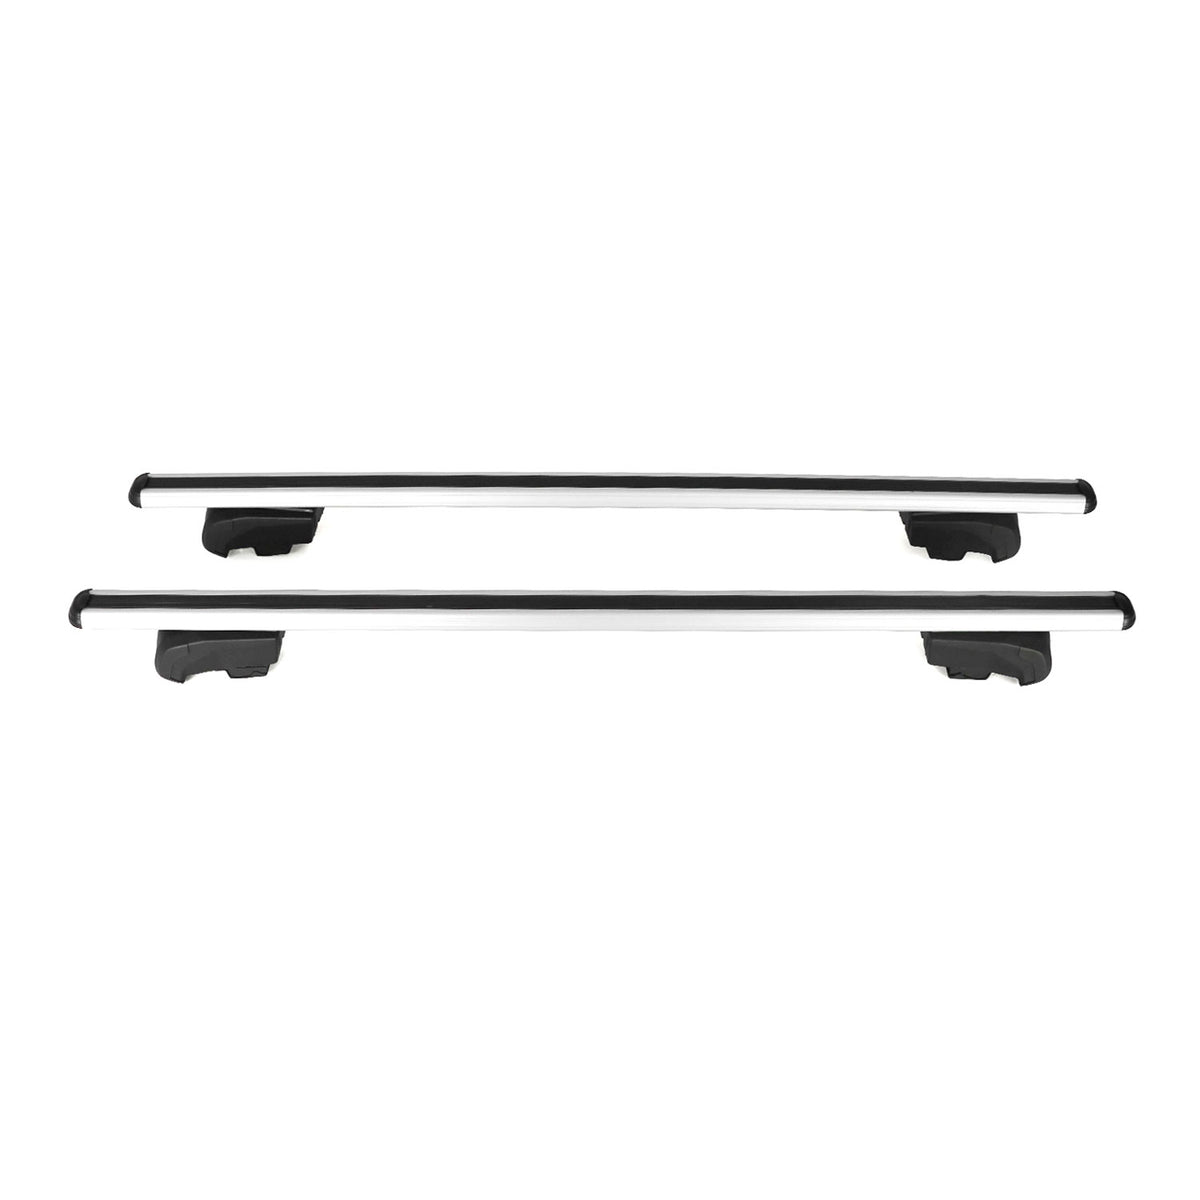 Roof rack luggage rack for Ford Focus MK3 Tournament 2011-2021 TÜV ABE Alu Gray 2x